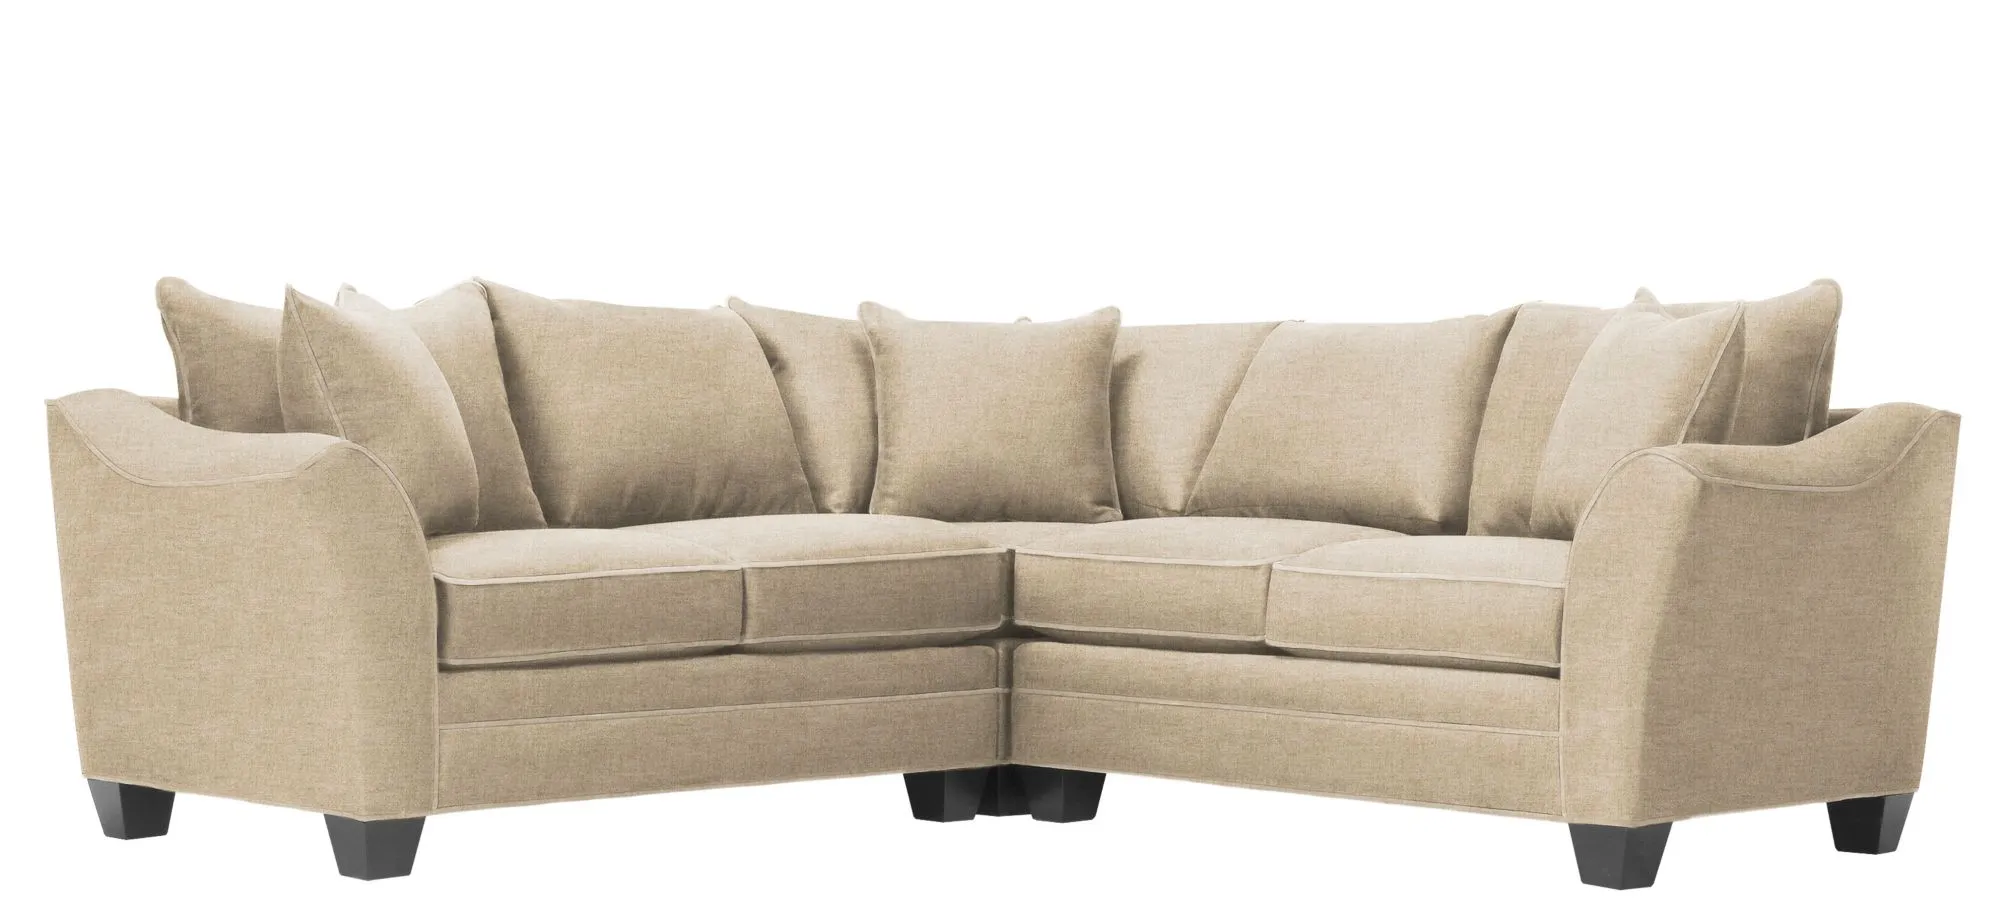 Foresthill 3-pc. Symmetrical Loveseat Sectional Sofa in Santa Rosa Linen by H.M. Richards